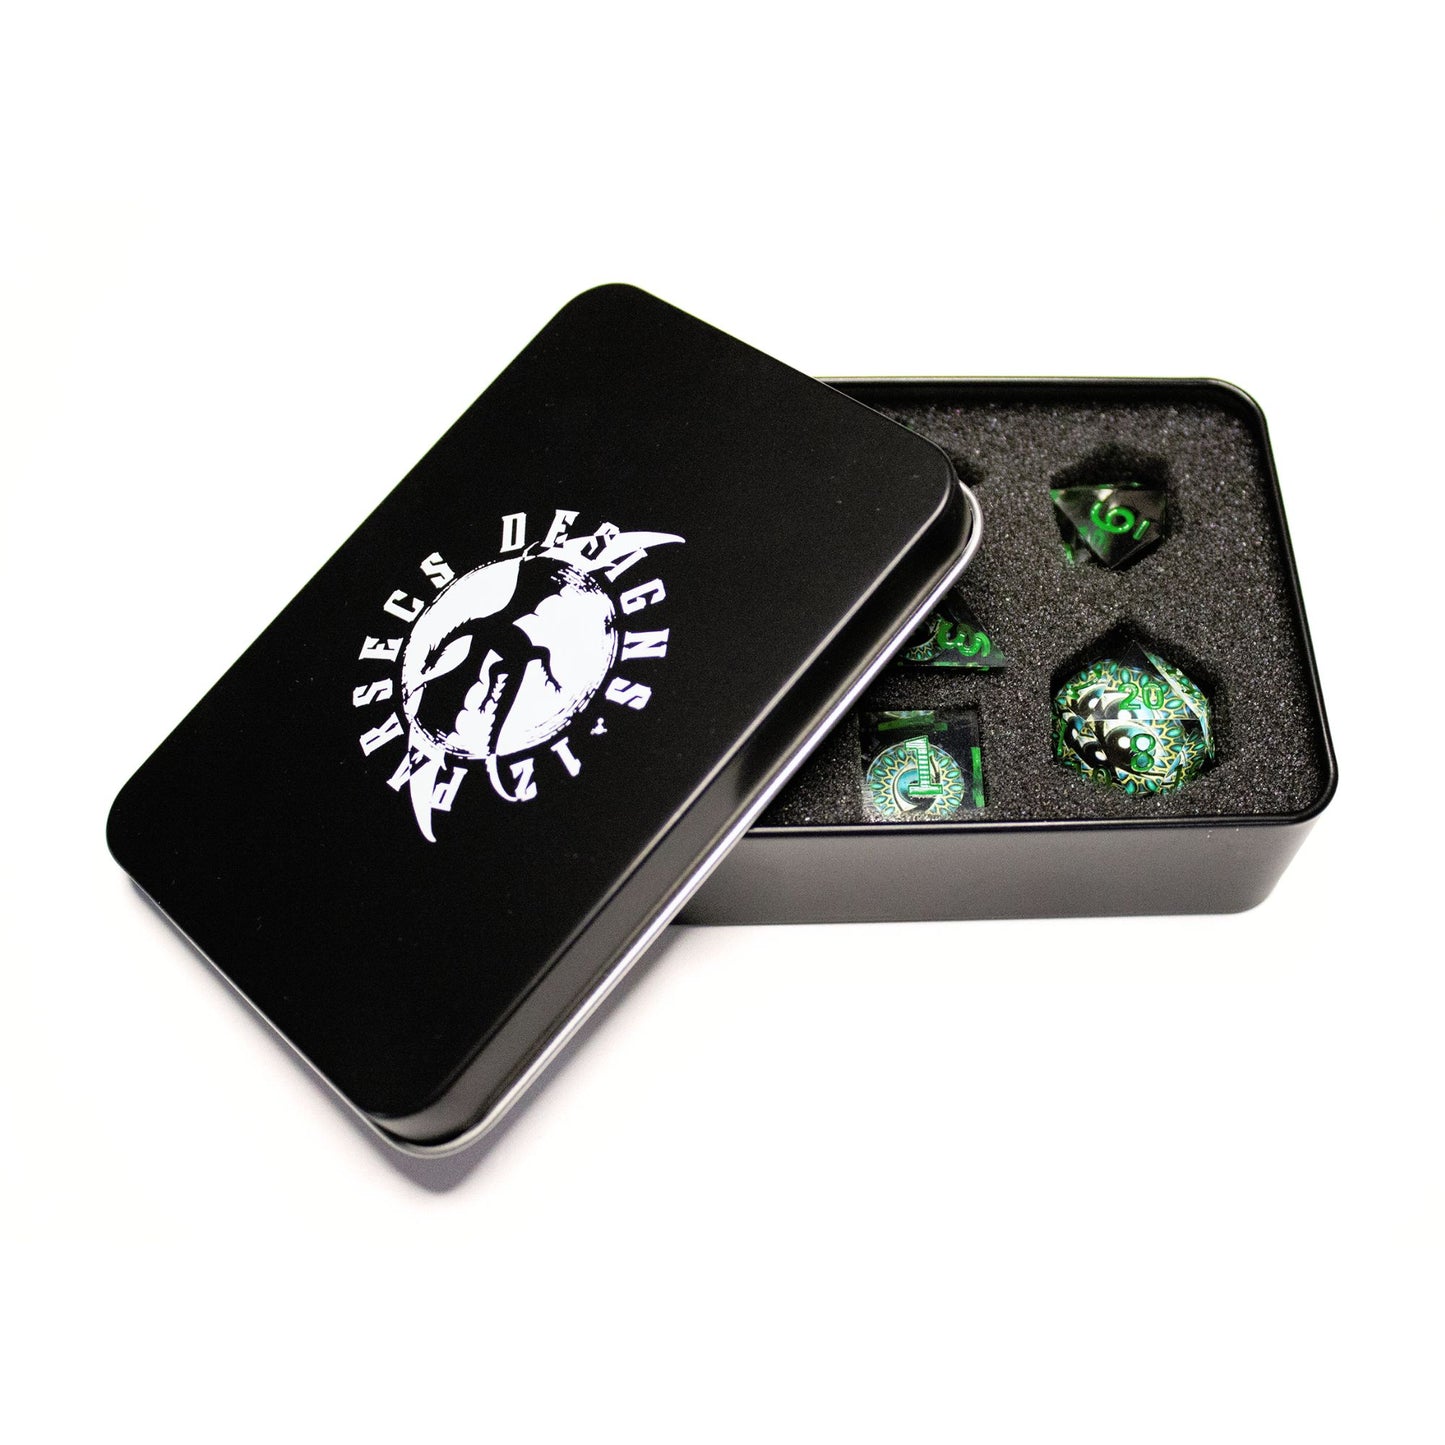 Little Worlds 7pc Resin Dice Set | The Mind's Eye